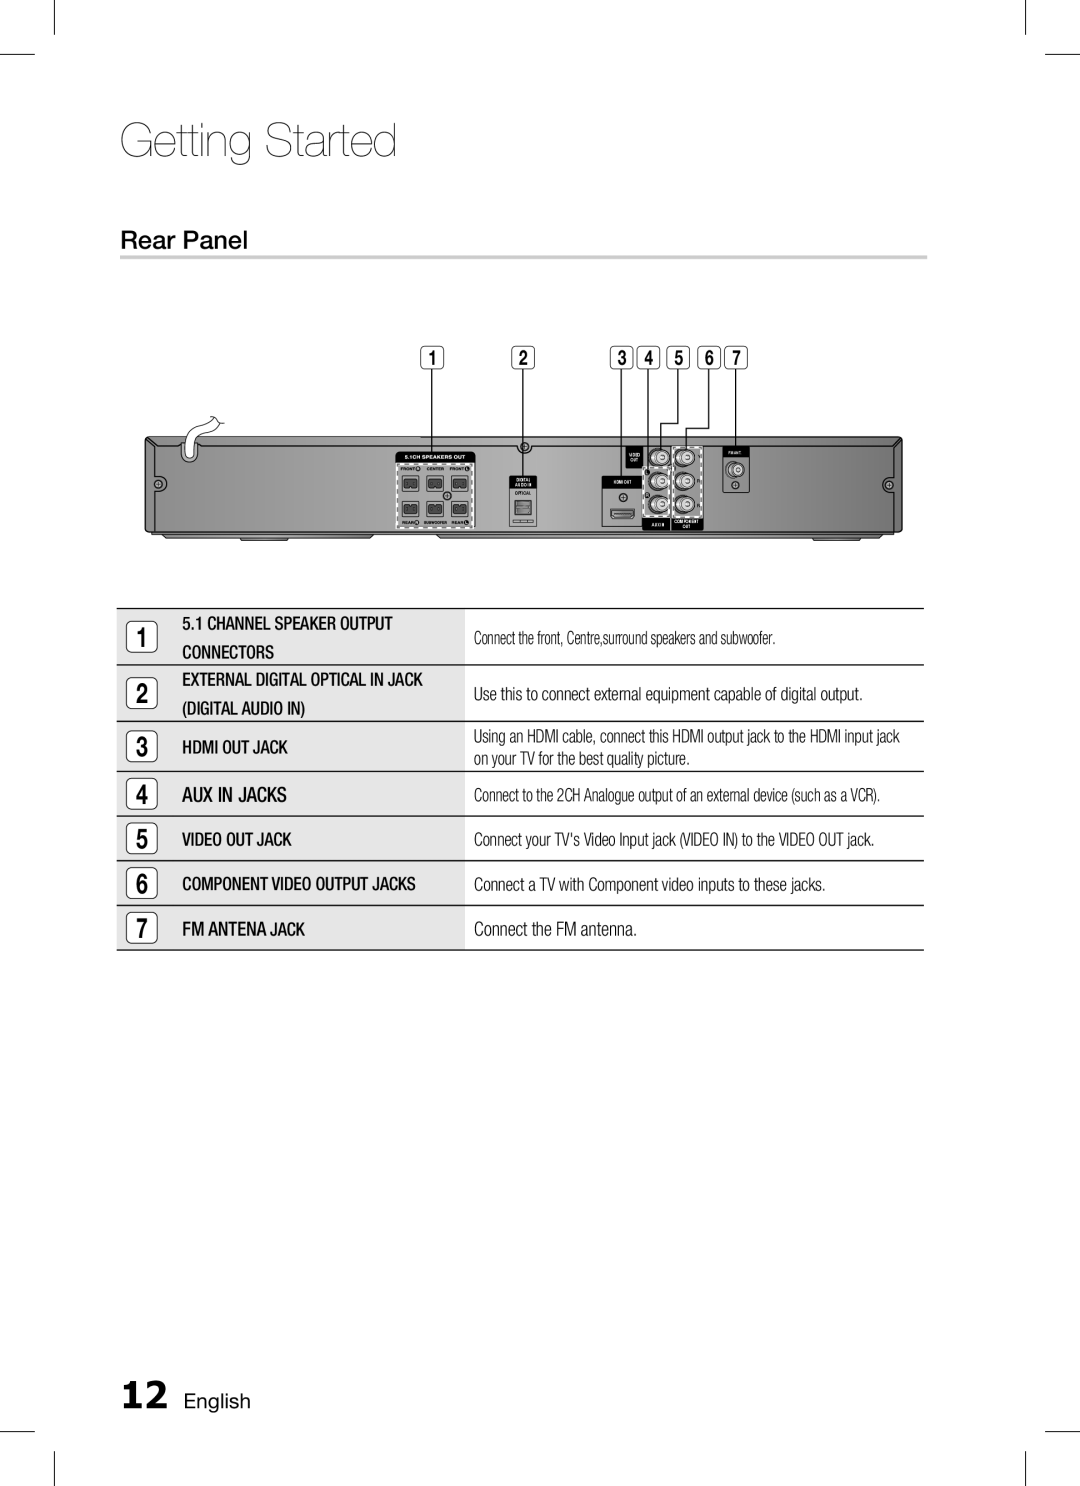 Samsung AH68-02293B, HT-C350 user manual Rear Panel, Getting Started, Aux In Jacks, English 